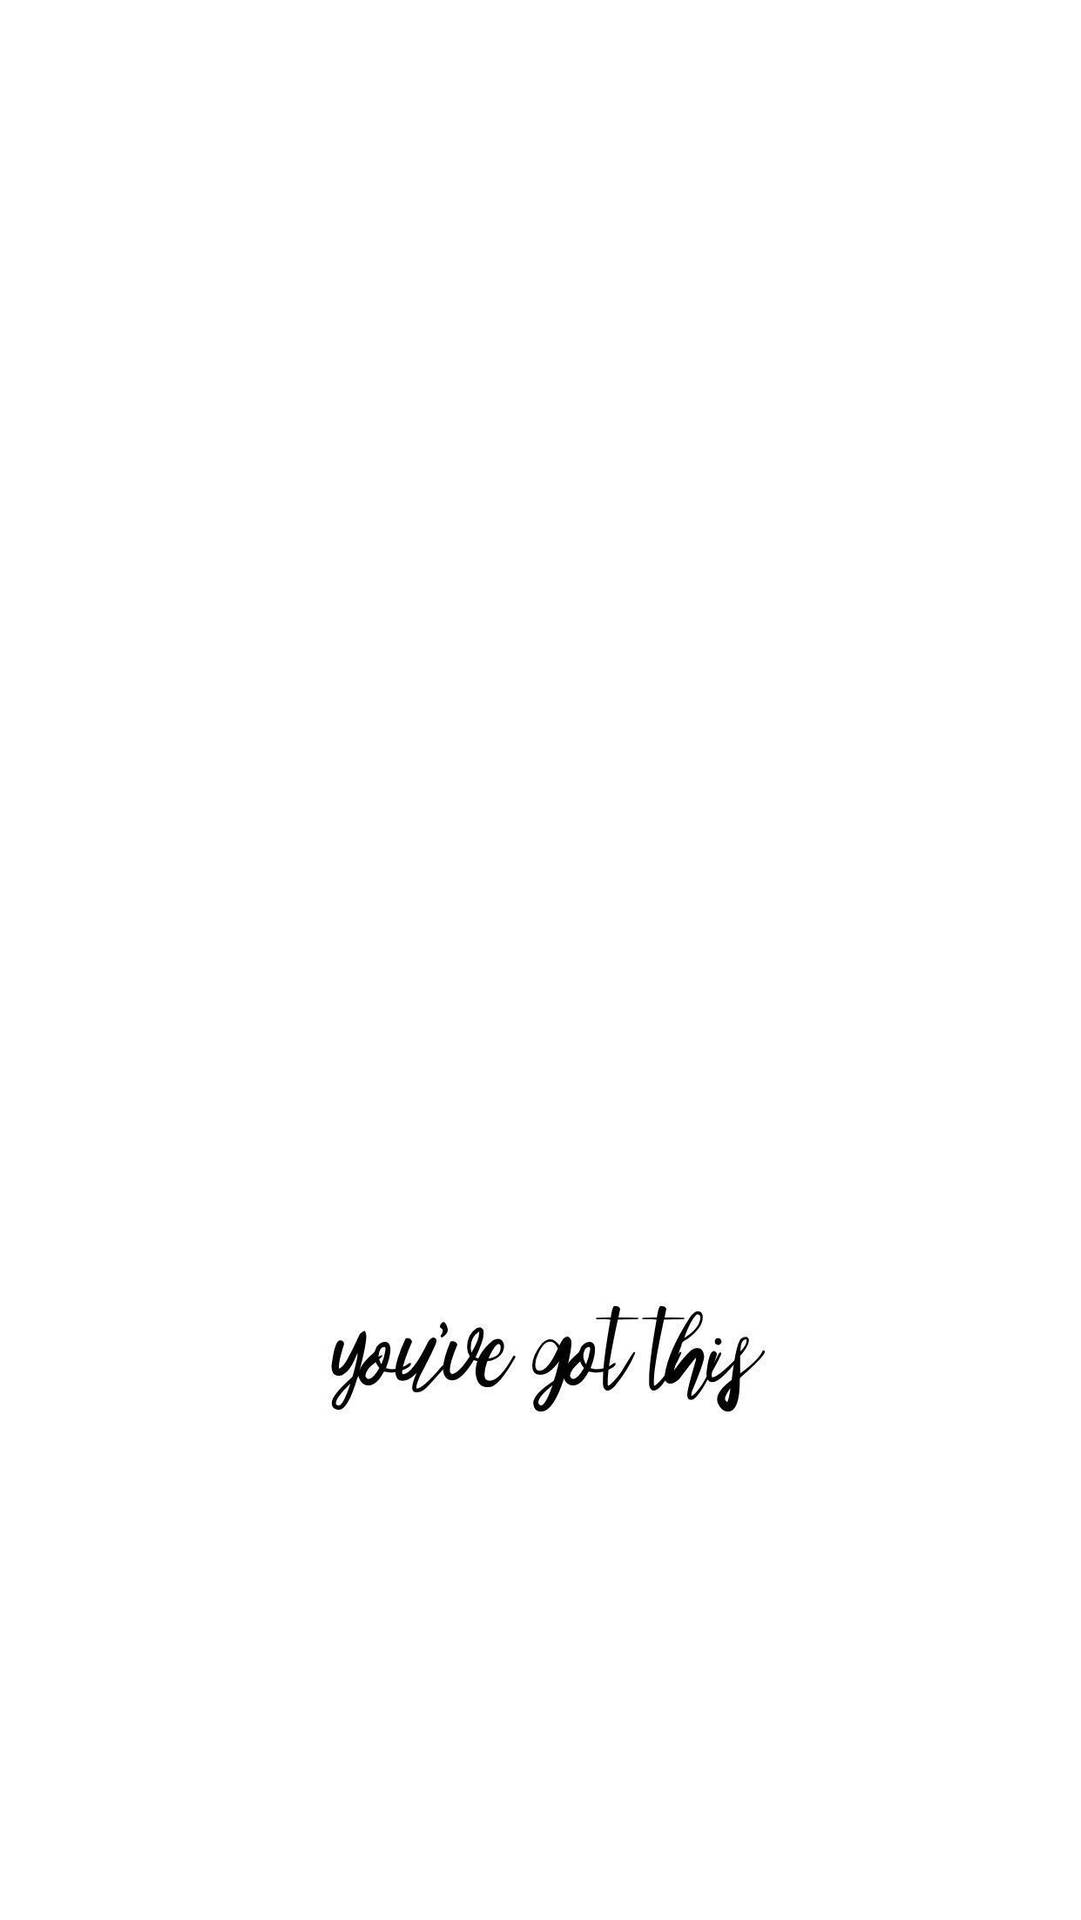 Inspirational Message In Cute White Aesthetic Background